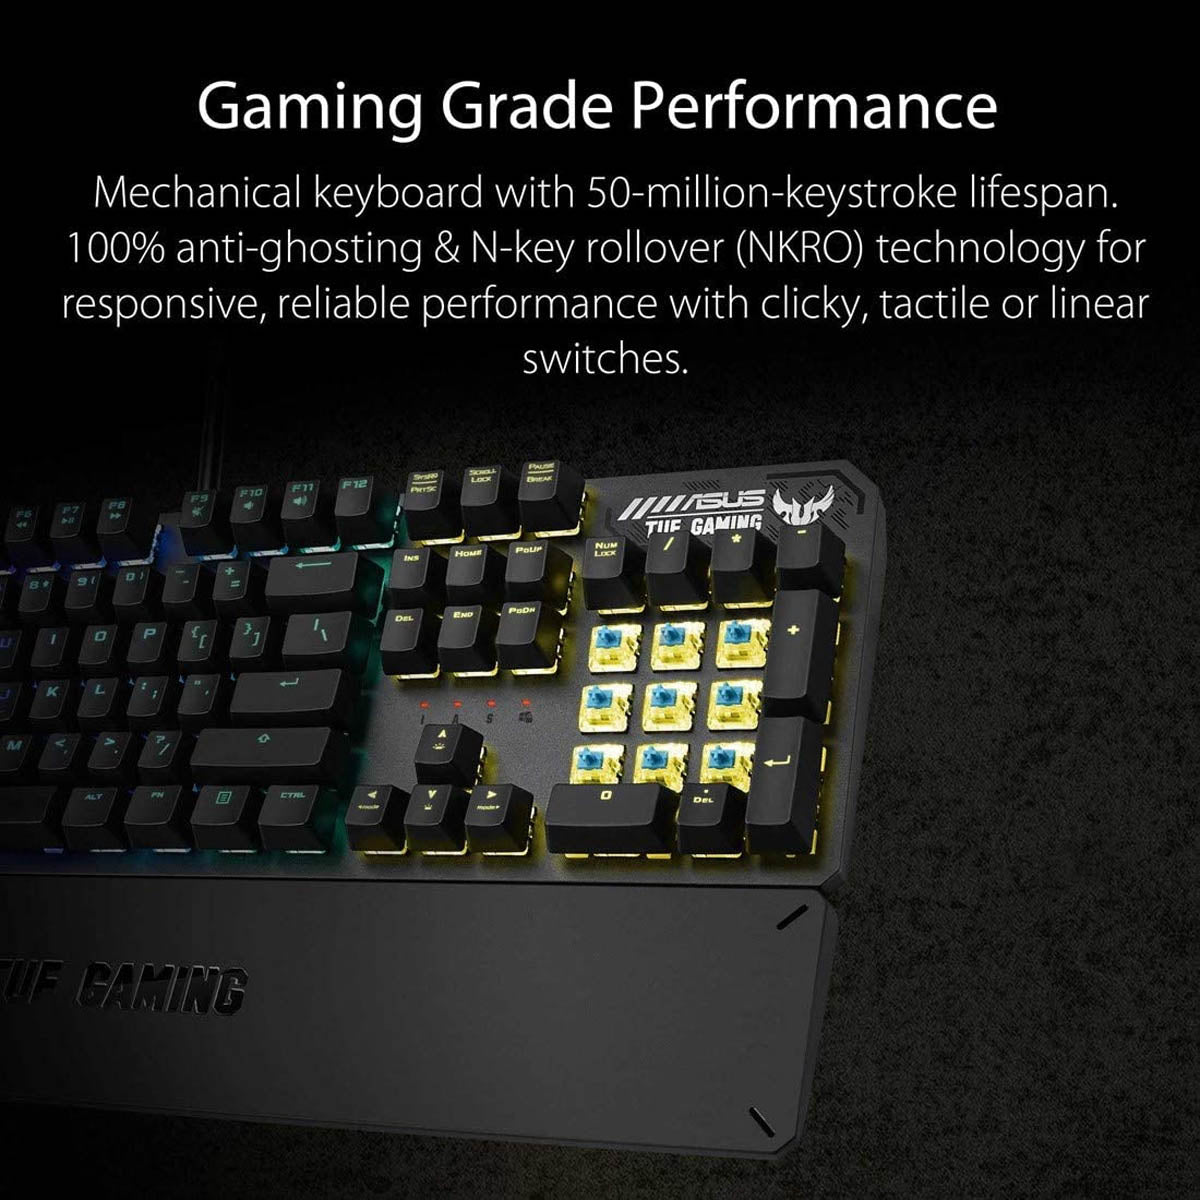 ASUS TUF GAMING K3 RGB Mechanical Keyboard with Detachable Wrist Rest and On-Board Memory